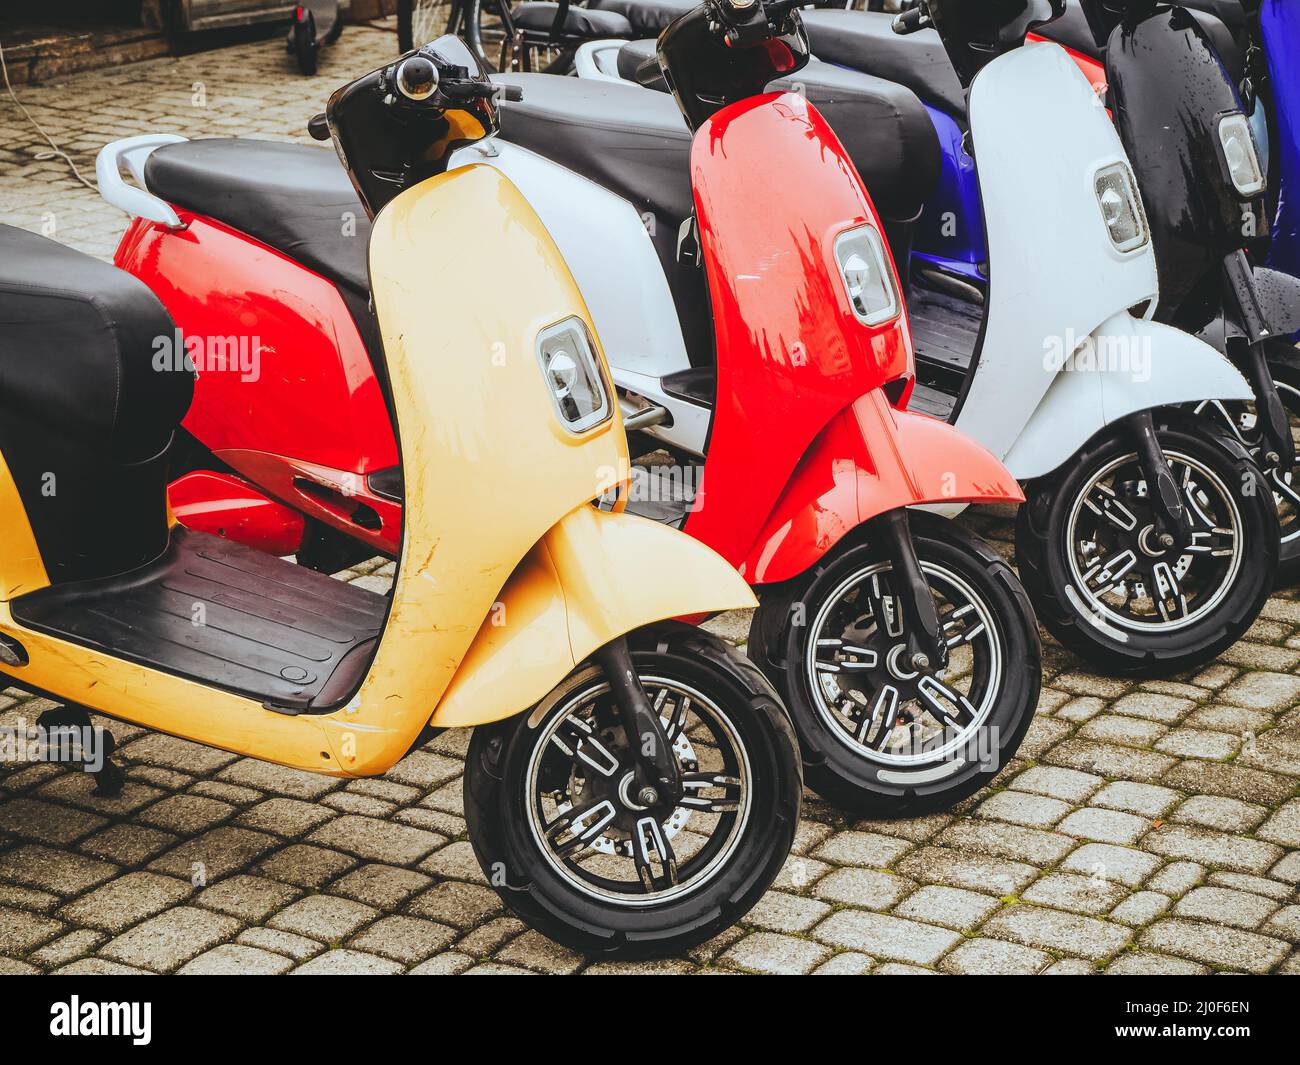 Electric motorcycles of different colors stand in a row on a stone paving slab. Stock Photo